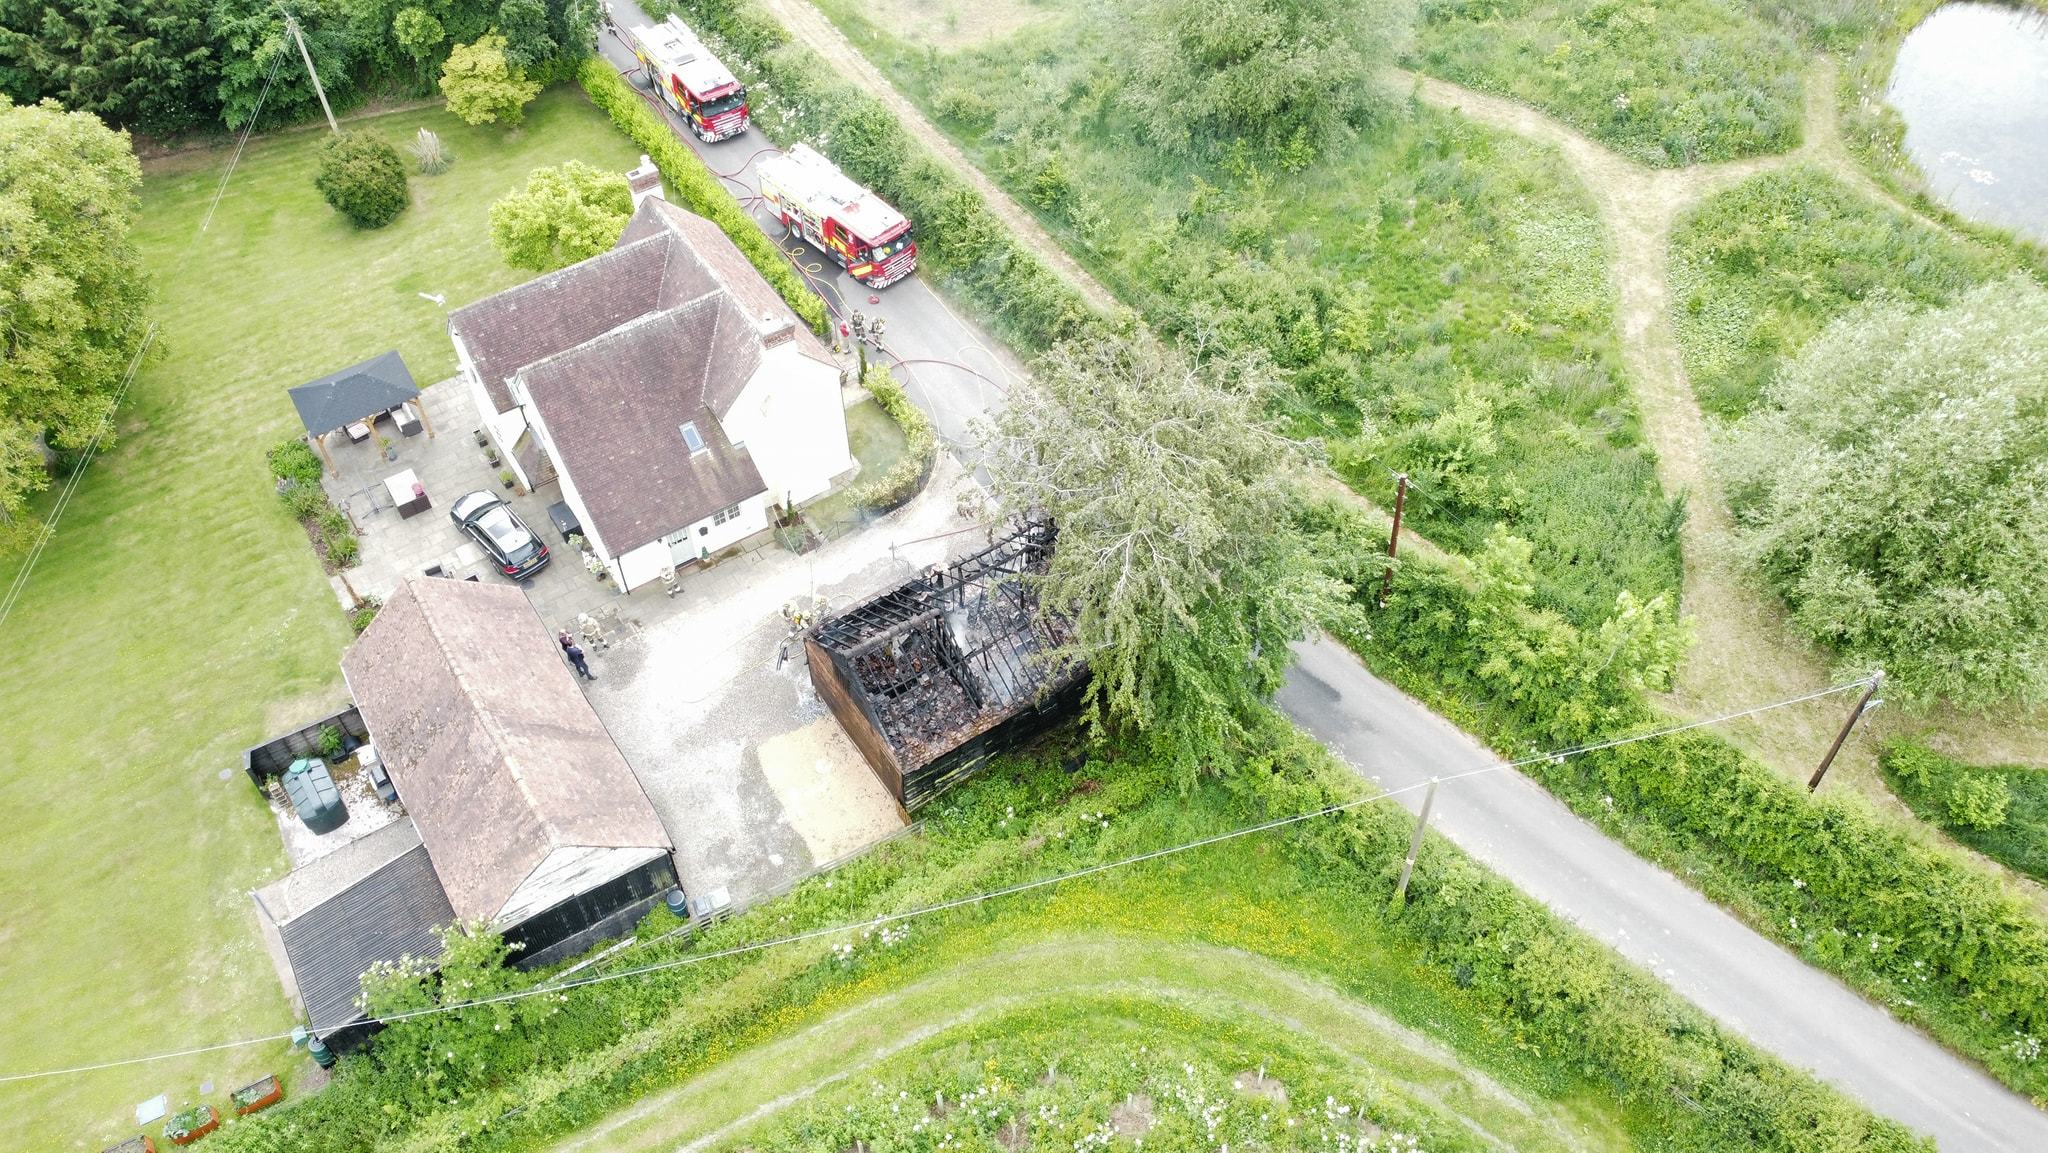 The damage cause by the fire in Auberrow, near Hereford. Picture courtesy of Keith George of Hereford Times Camera Club.